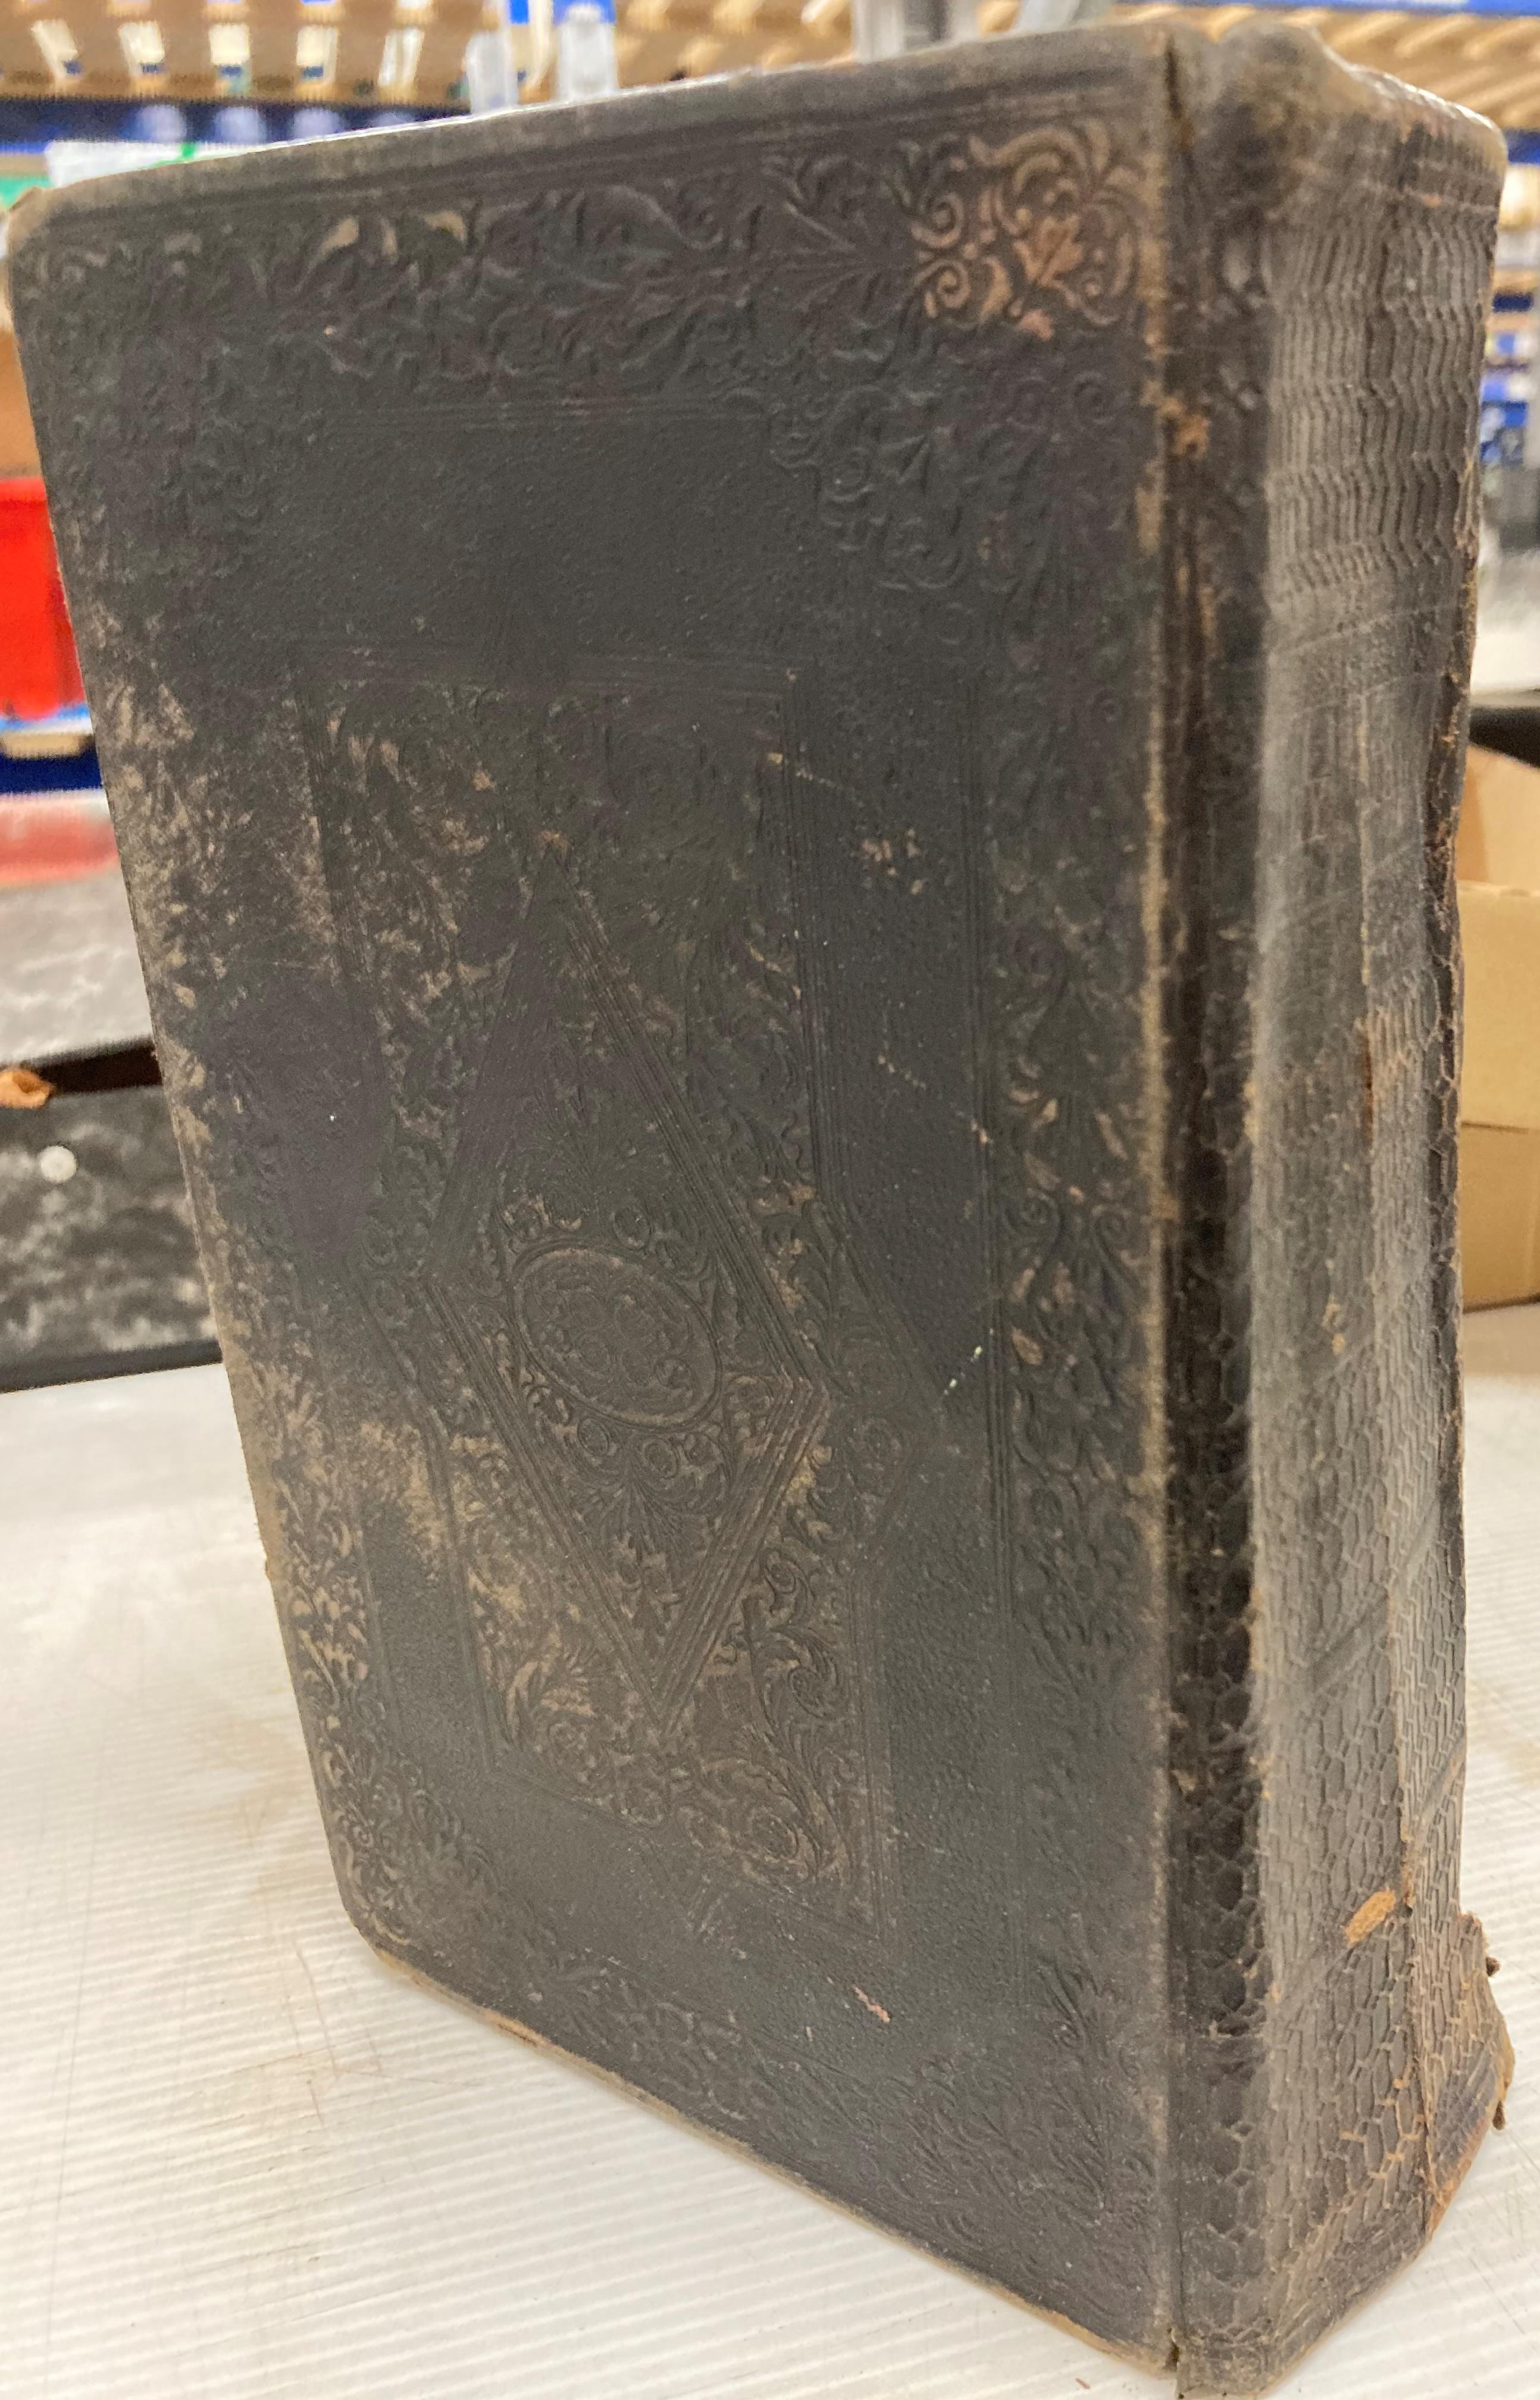 An old copy of the Holy Bible in poor condition (Saleroom location: H08) - Image 3 of 6